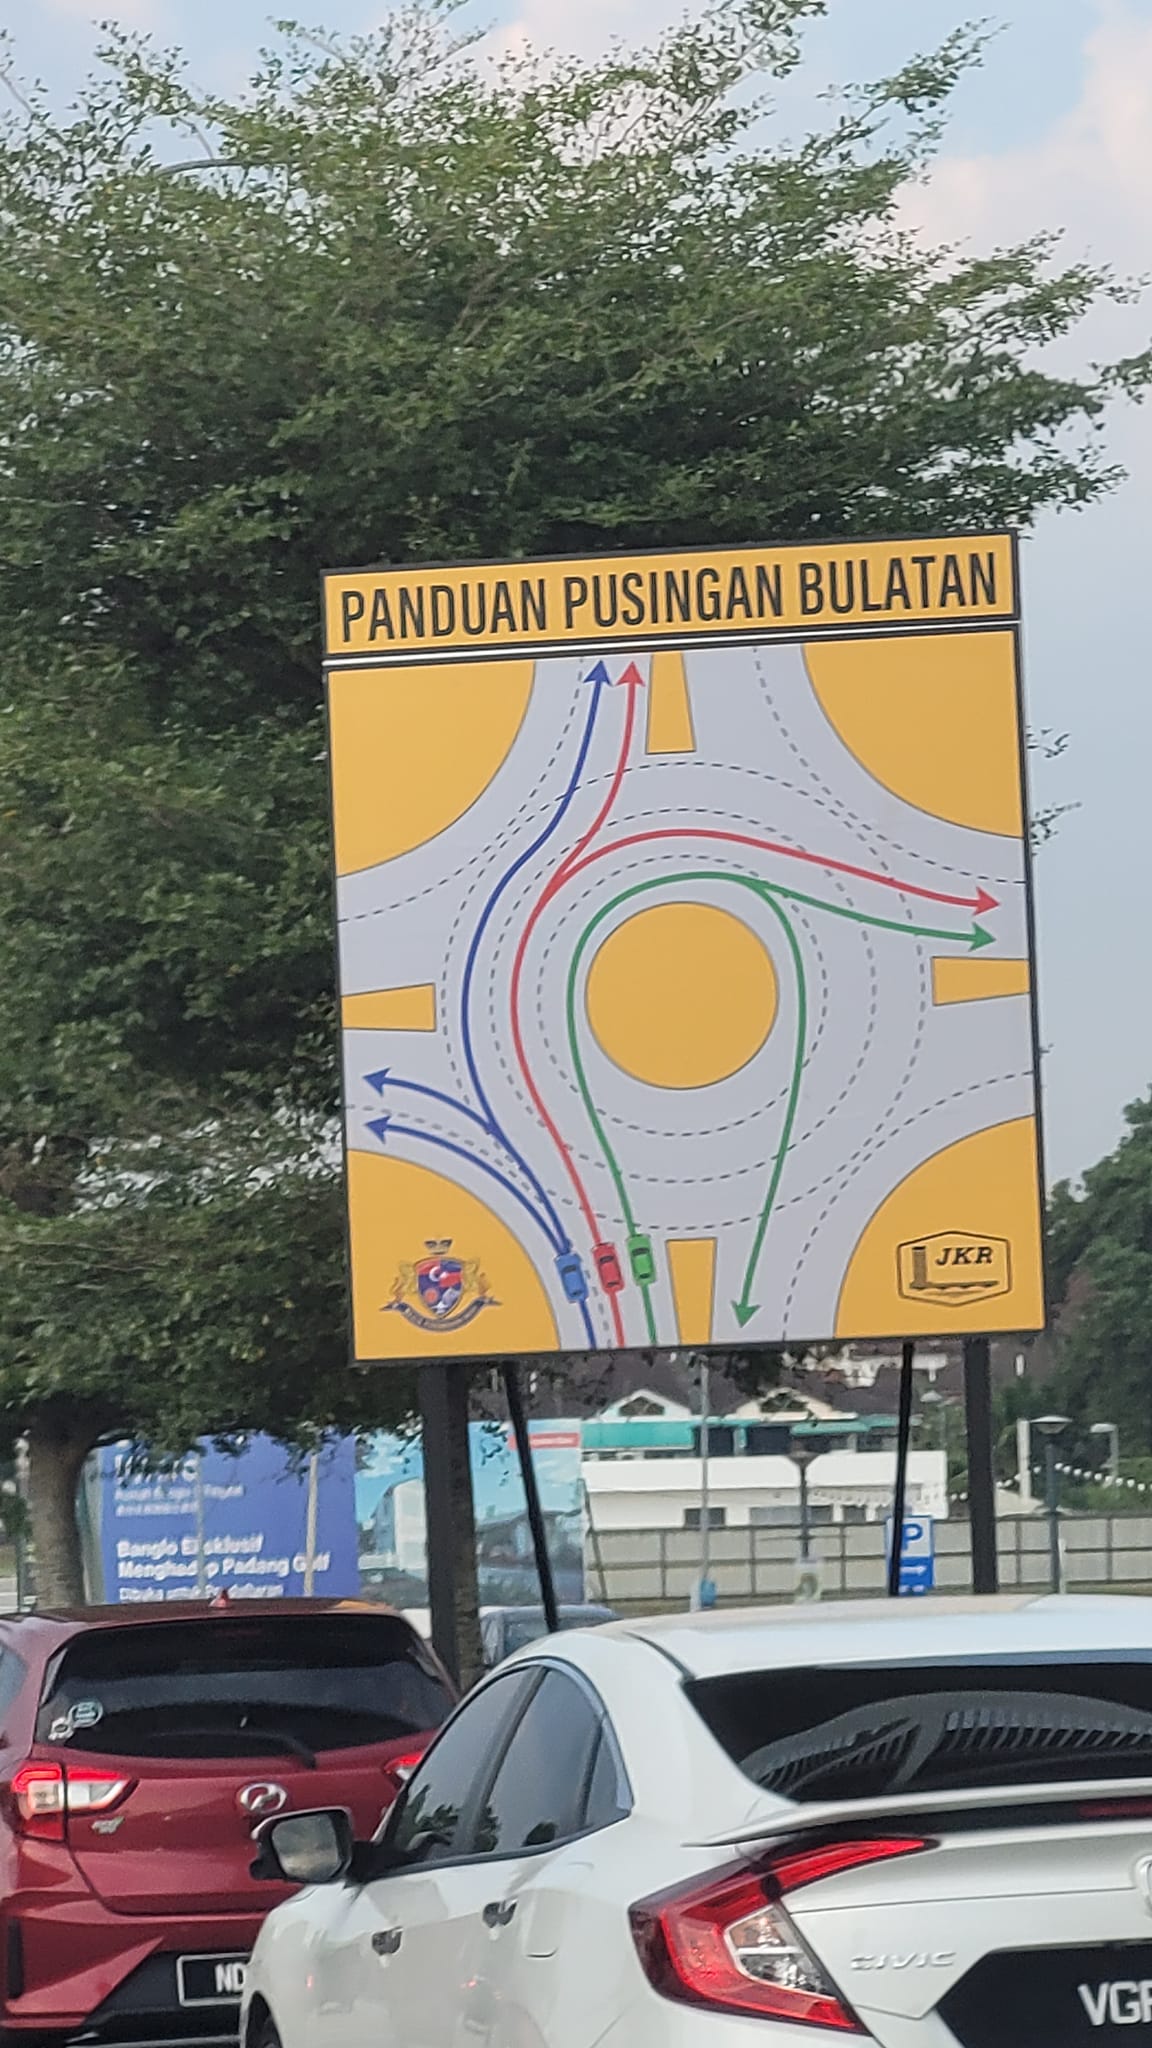 This huge roundabout billboard was set up in johor to help those unfamiliar with driving around one | weirdkaya